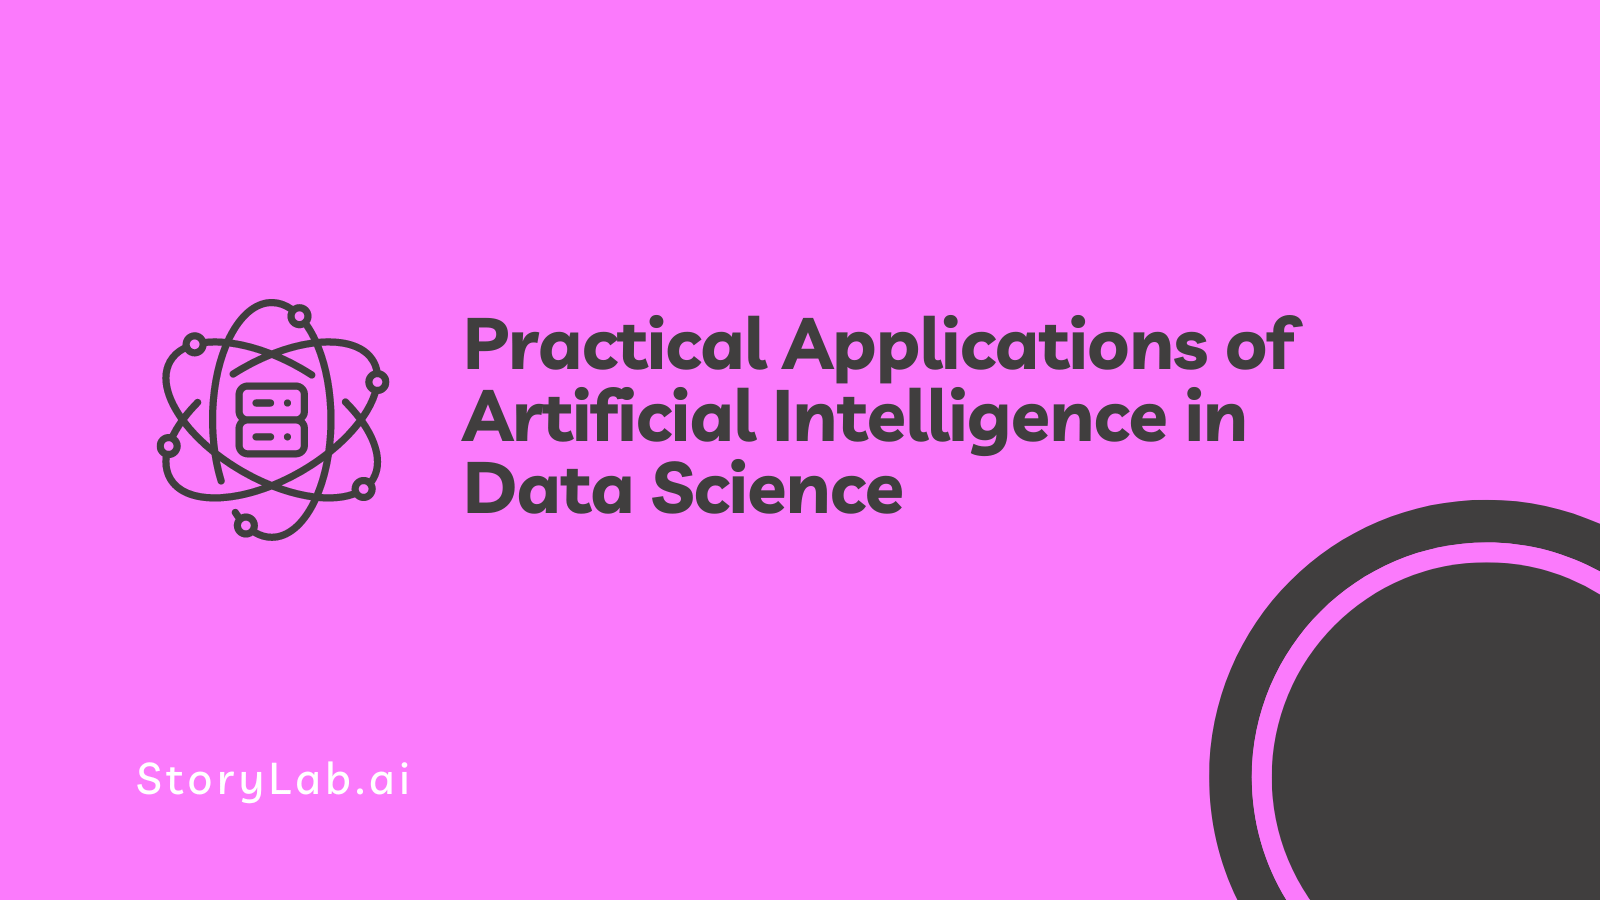 Practical Applications of Artificial Intelligence in Data Science